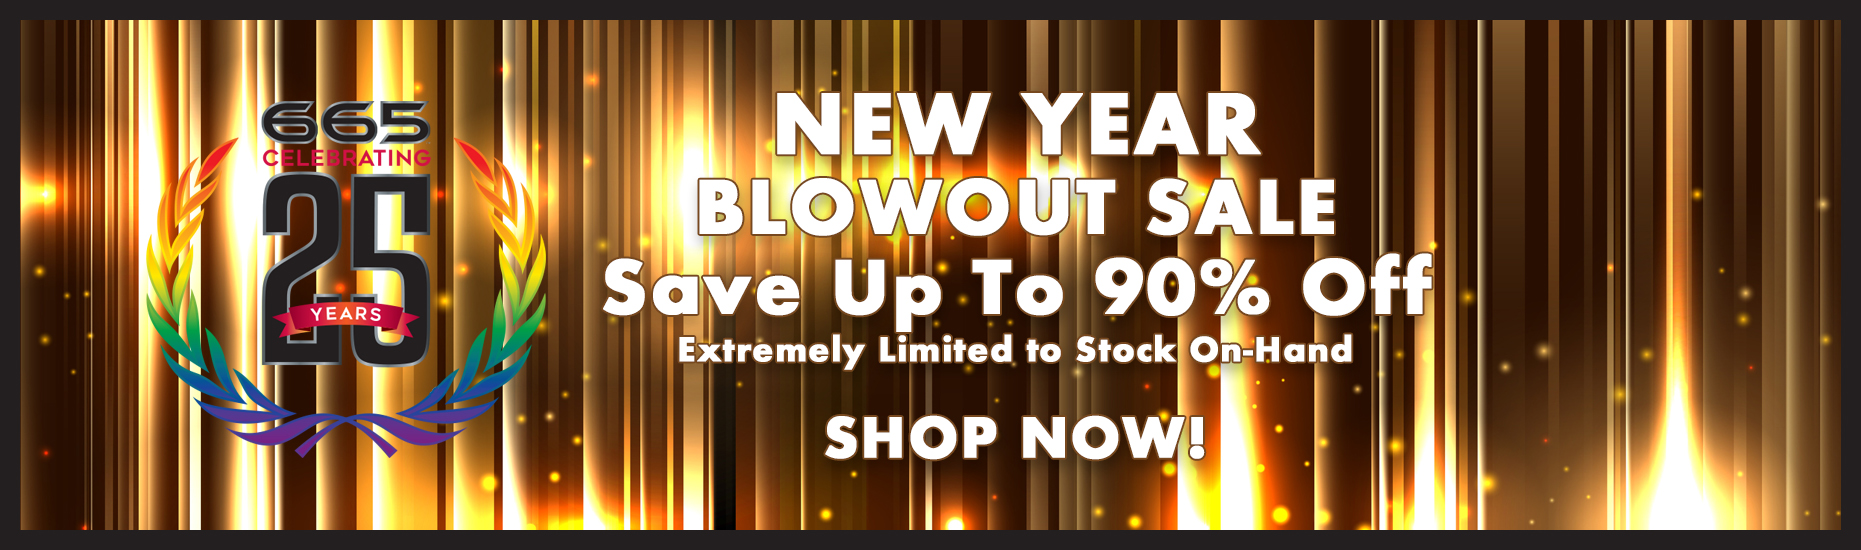 New Year Blowout Sale - Save Up To 90% - Shop Now!